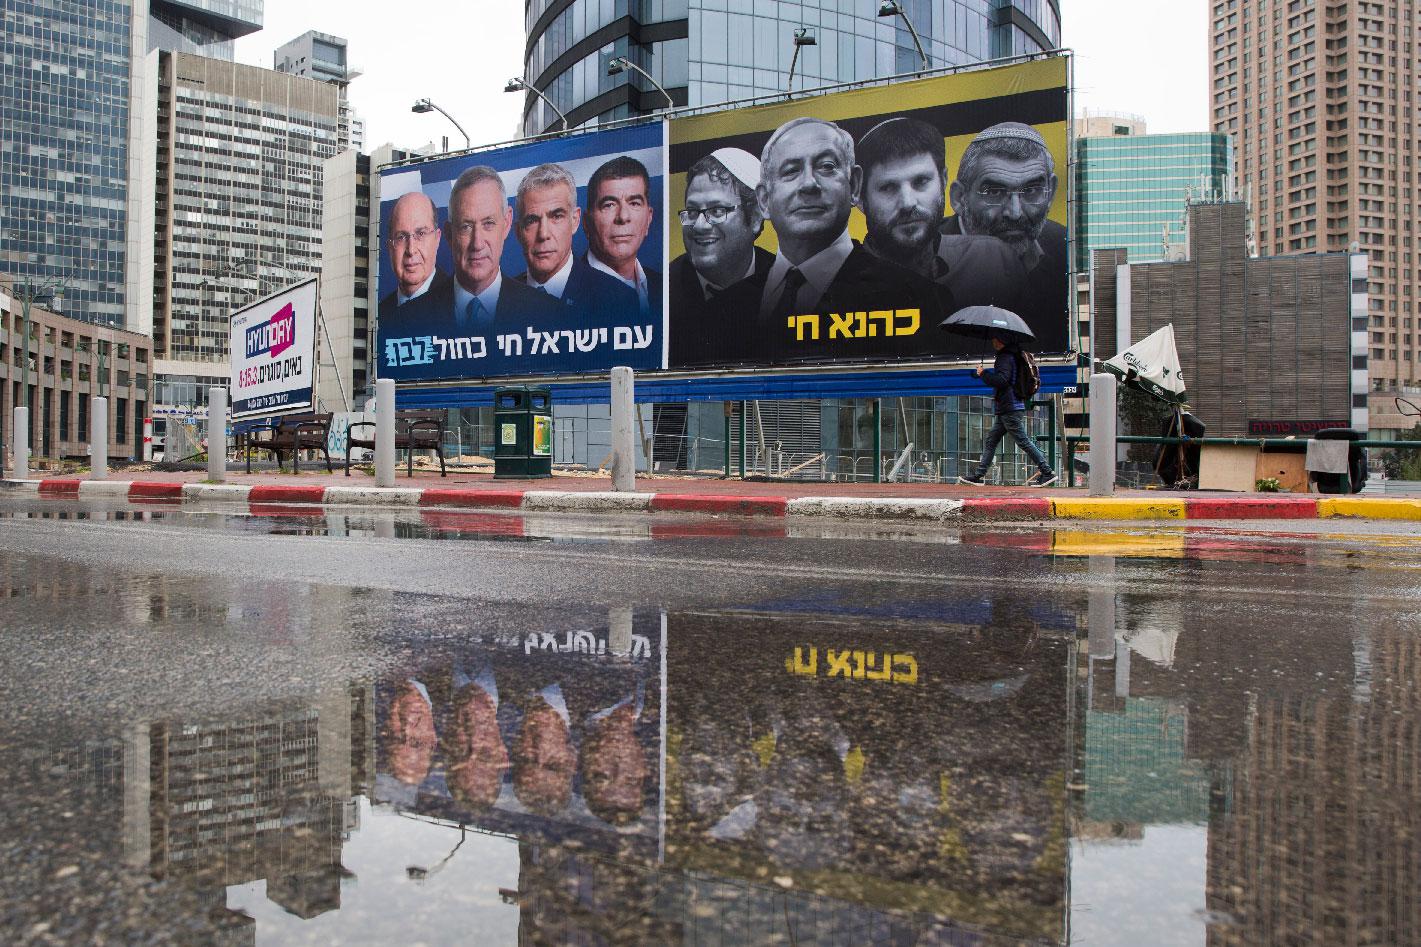 Elections billboards of the Blue and White party leaders, from left to right, Moshe Yaalon, Benny Gantz, Yair Lapid and Gabi Ashkenazi, alongside a panel on the right showing Prime Minister Benjamin Netanyahu flanked by extreme right politicians, from the left, Itamar Ben Gvir, Bezalel Smotrich and Michael Ben Ari in Ramat Gan, Israel, Saturday, March 16, 2019.